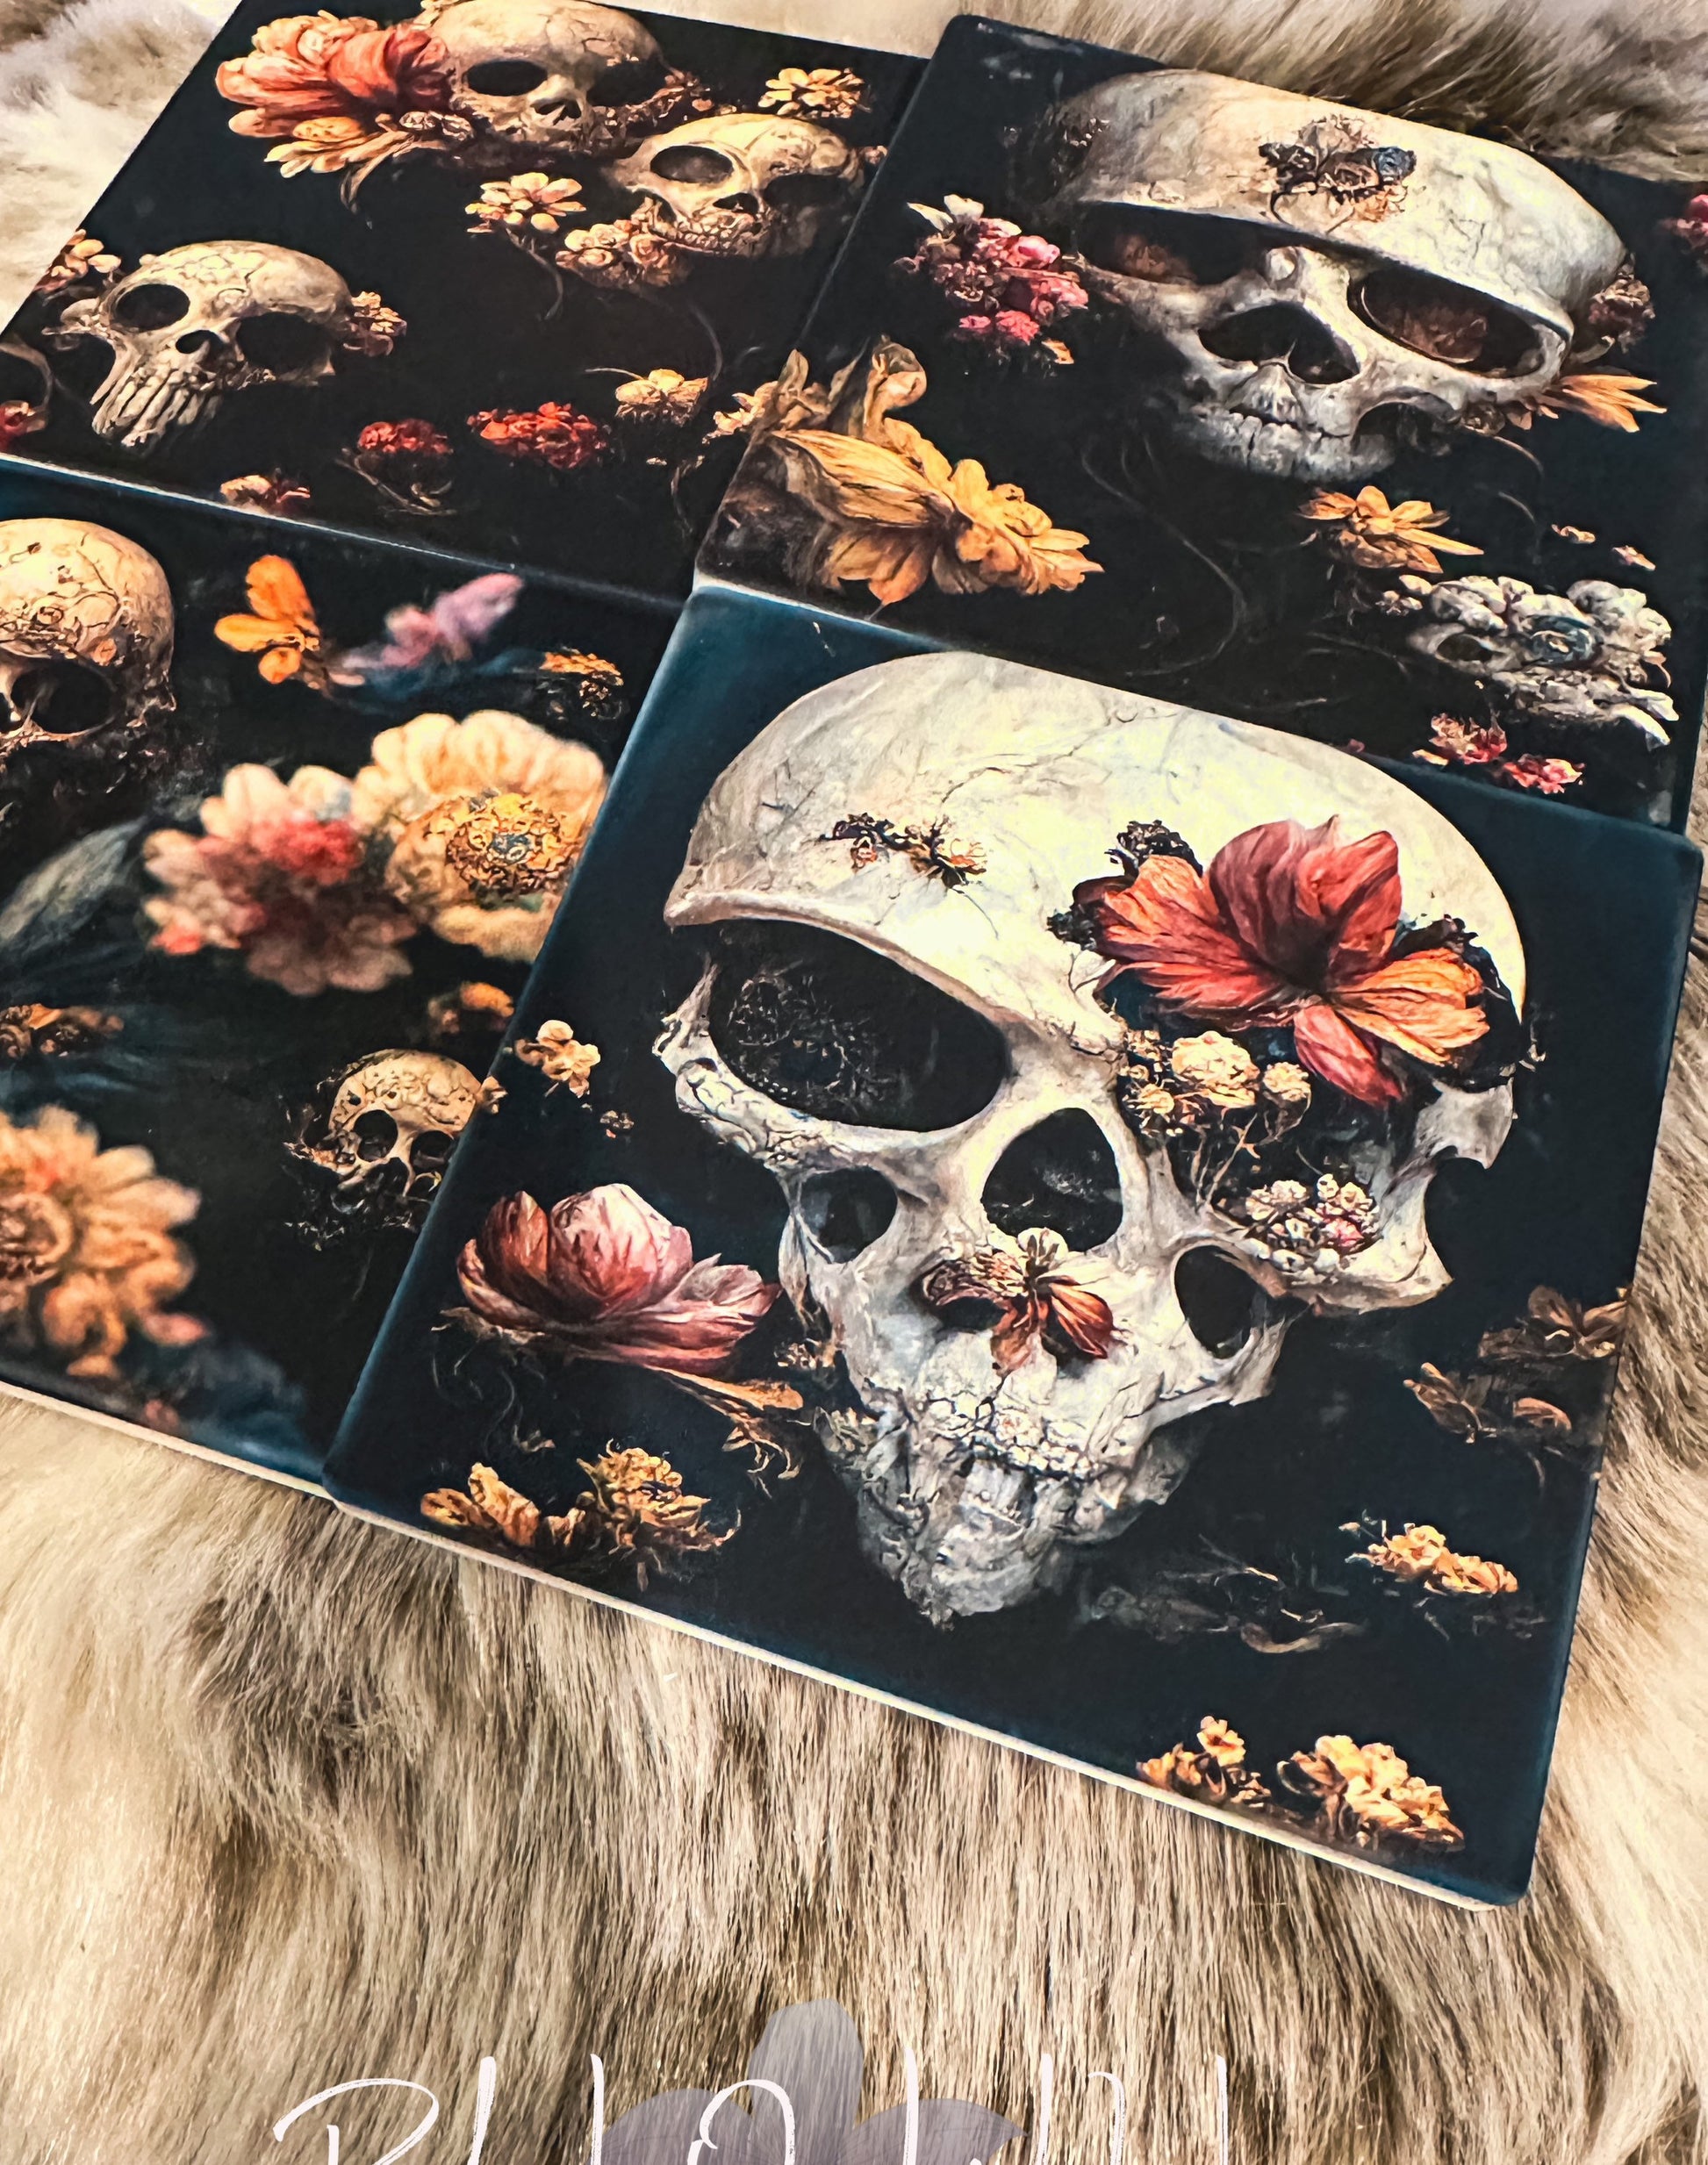 Dark Academia Skull Set of 4 Sandstone Coasters, Floral Skull Goth Coasters, Furniture and decor, goth home decor, gift for her